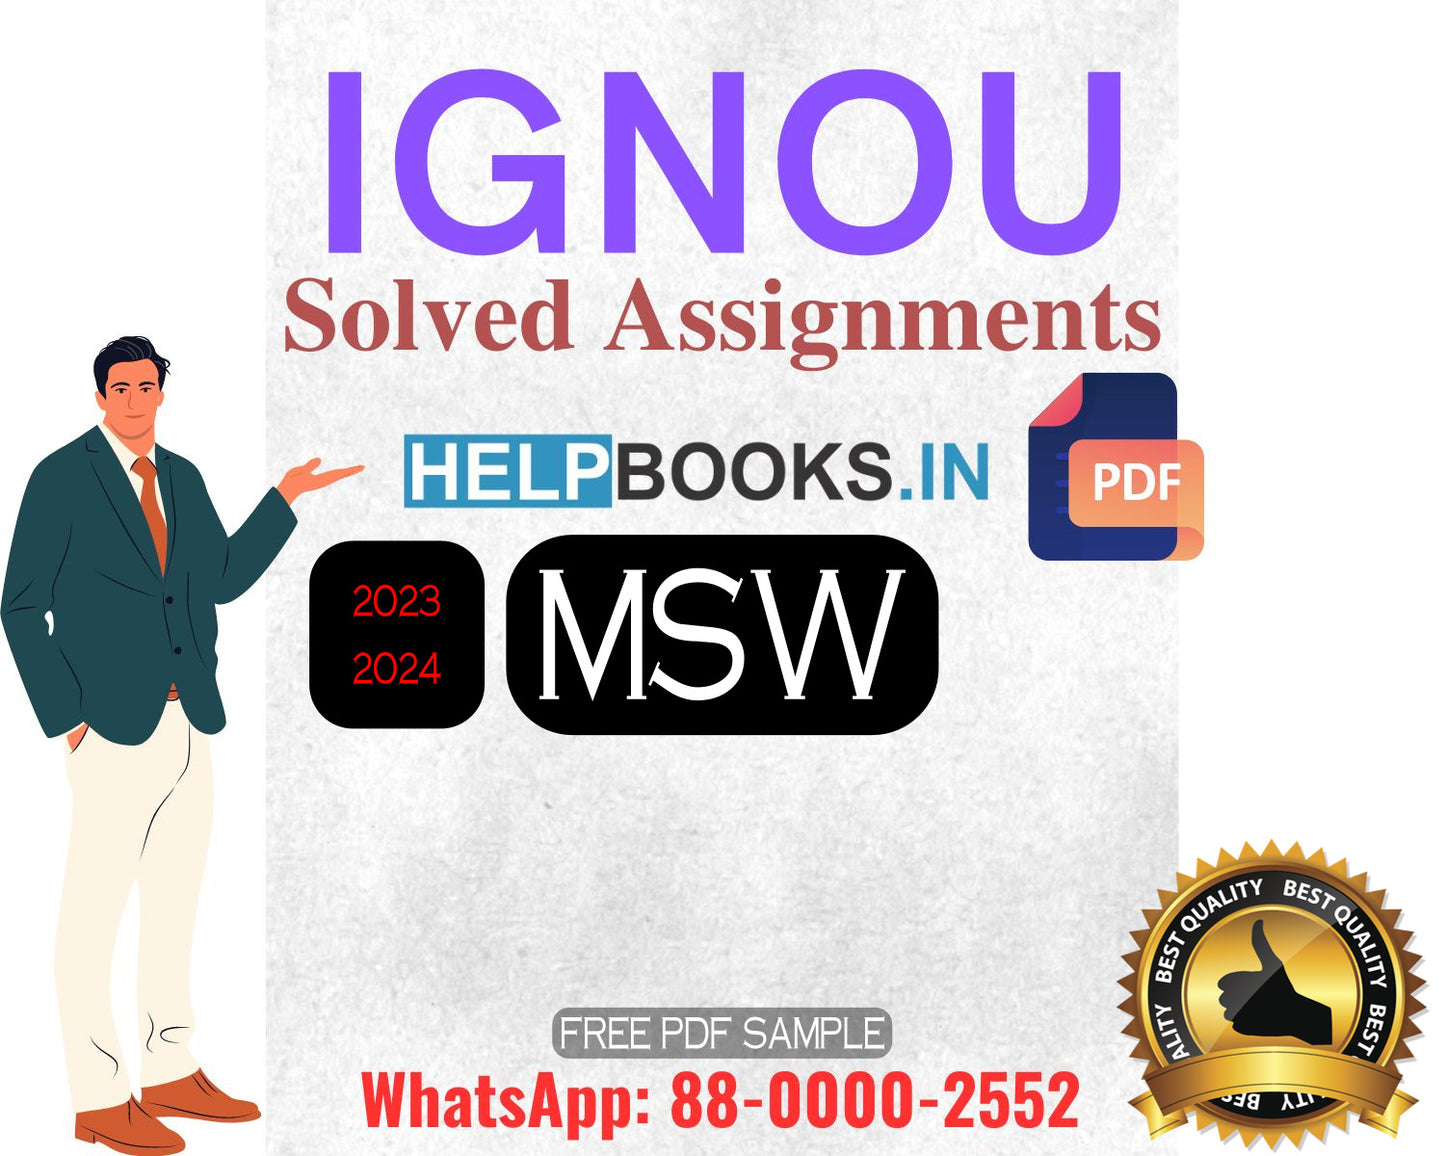 IGNOU Master's Degree Programme Latest IGNOU Solved Assignment 2023-24 & 2022-23 Sessions : Master of Social Work MSW Solved Assignments